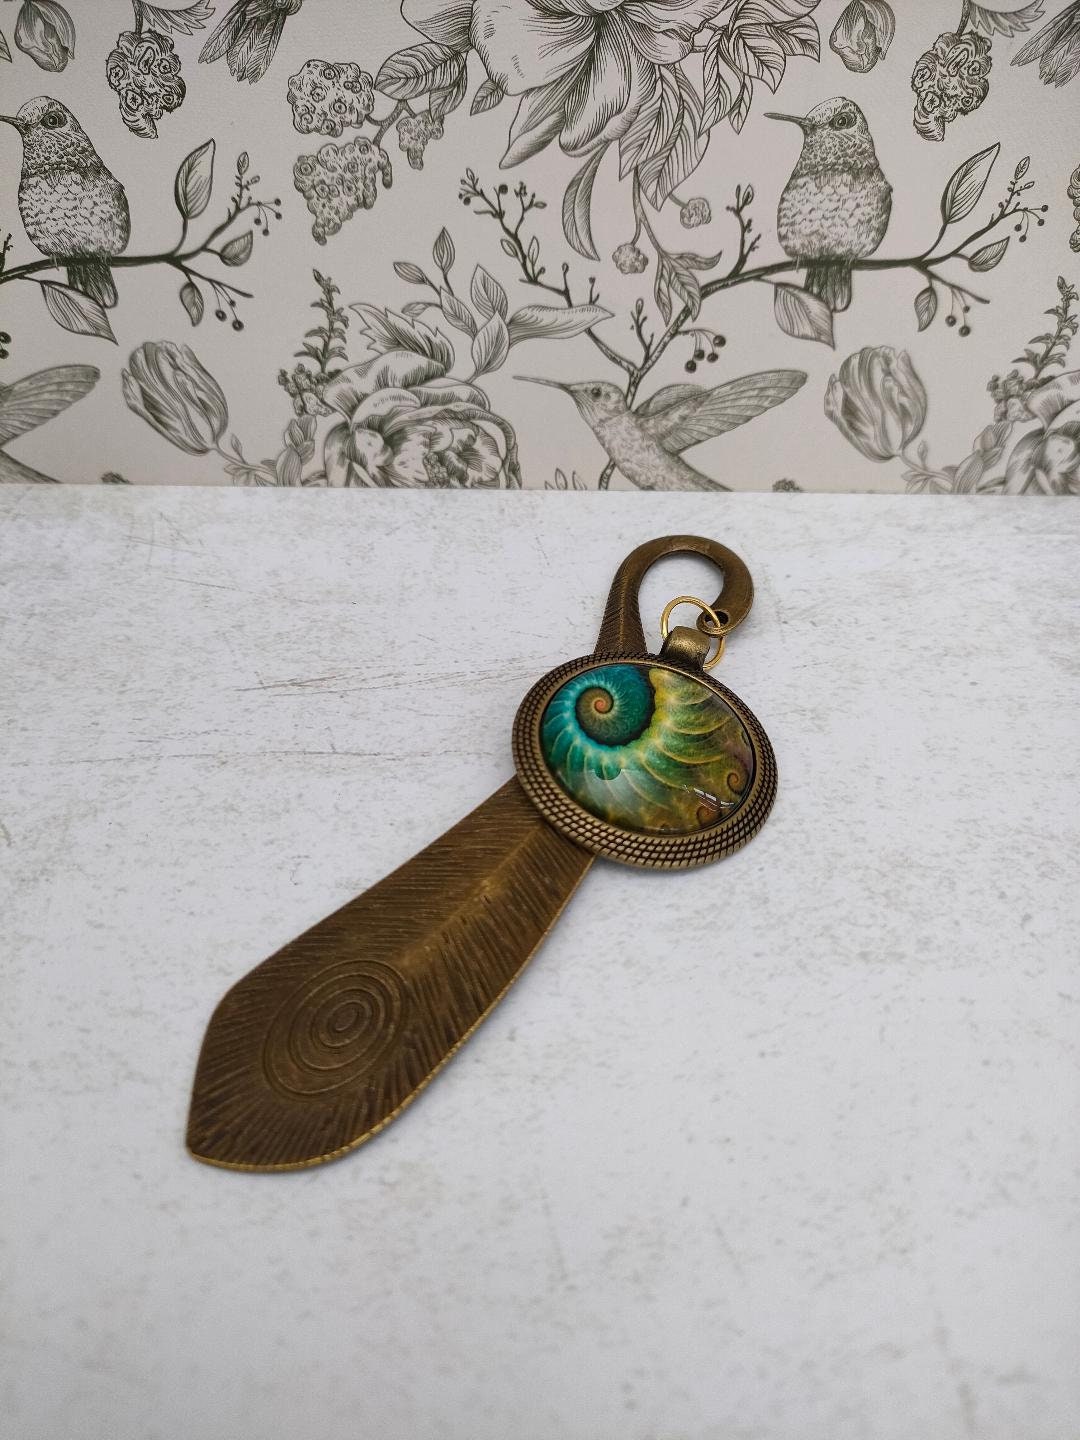 Peacock Antique Bronze Tibetan Style Alloy Bookmarks, Bird themed Bookmarker, Gift for Book Lovers, Reading Accessories and Gfits